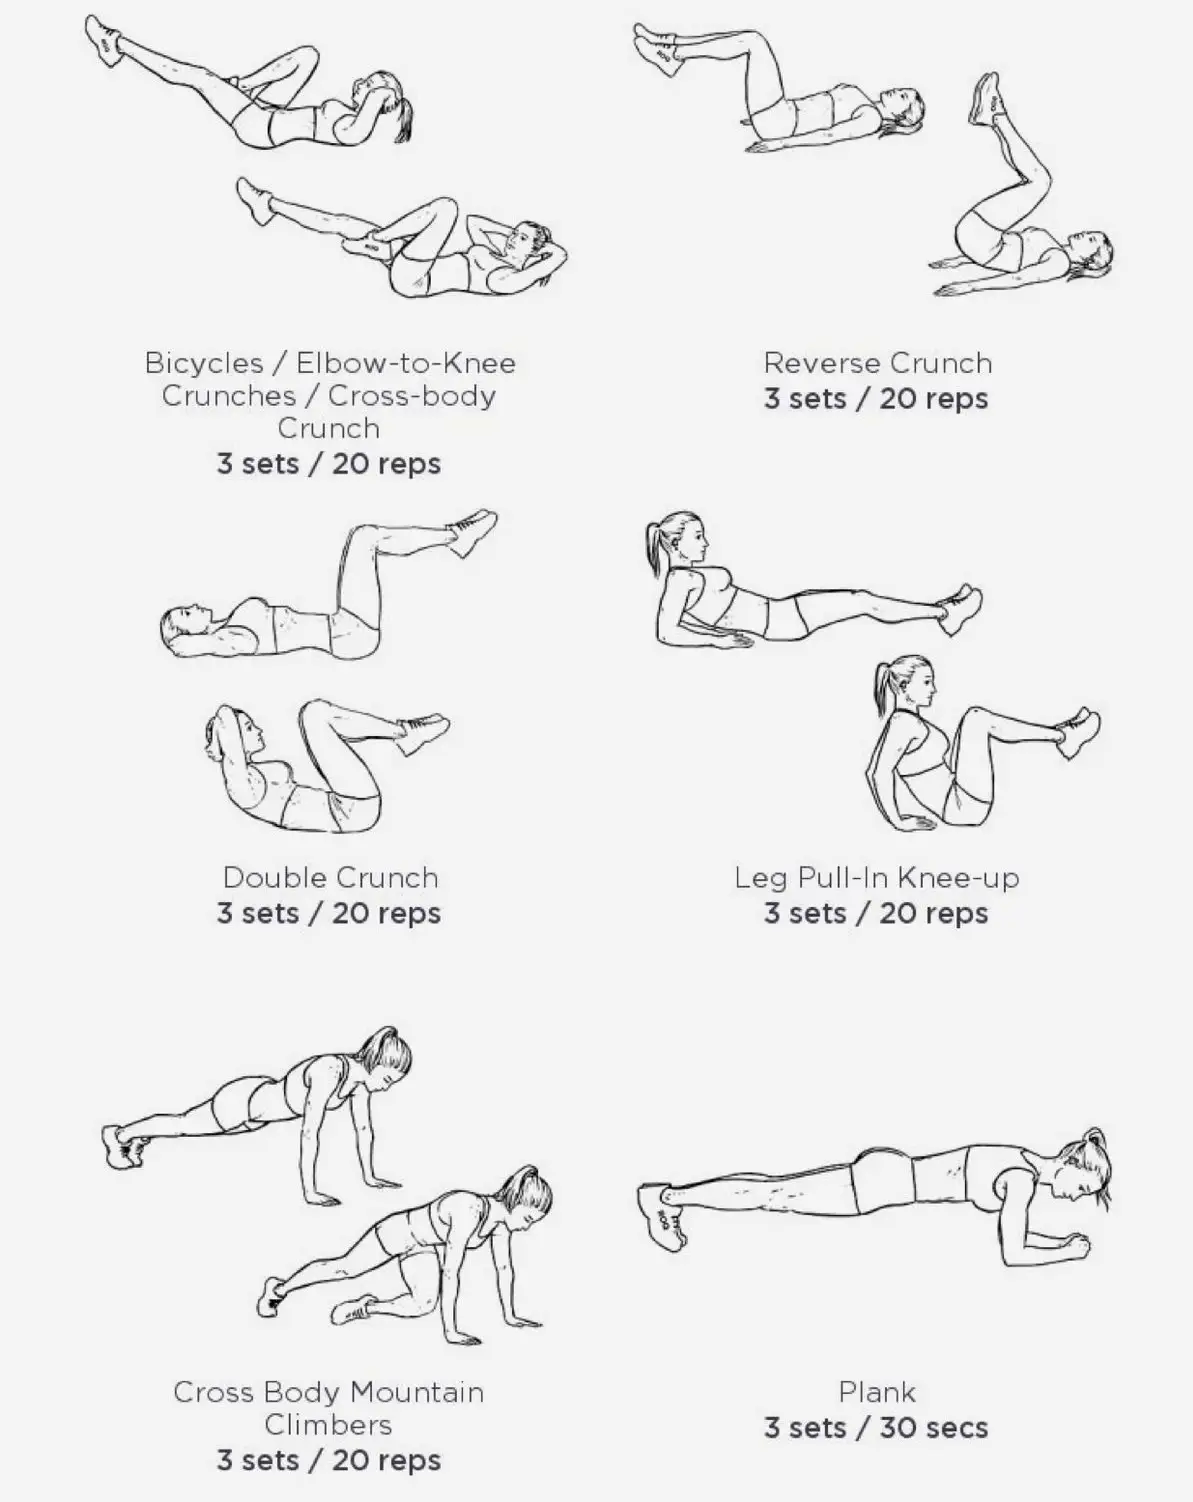 20 of the Best Ab Exercises and Ab Workouts To Get a Six-Pack